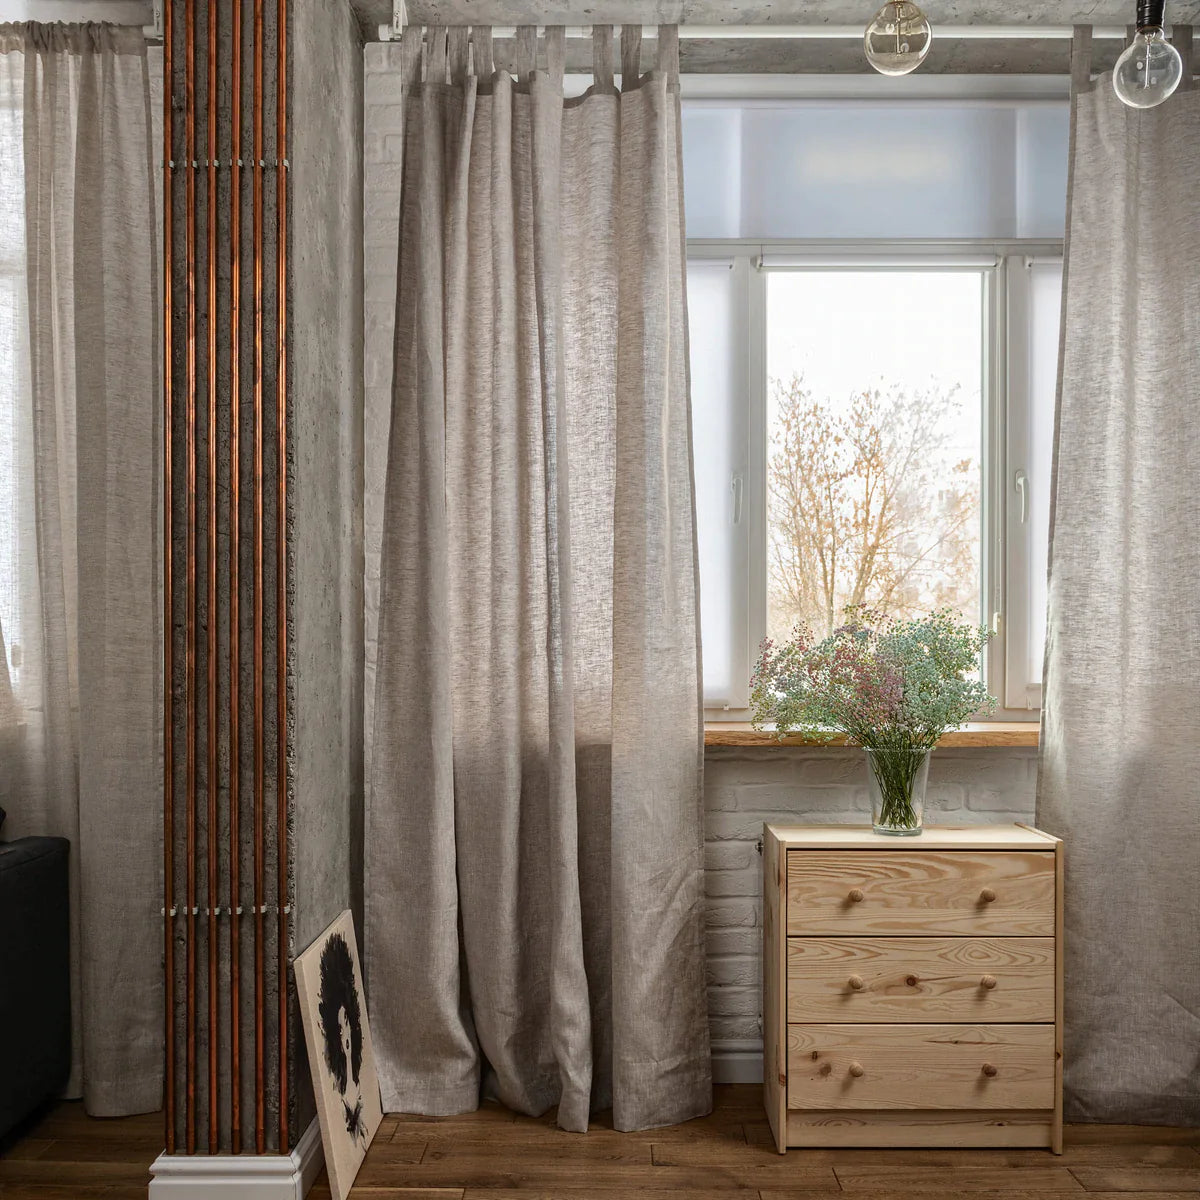 Linen Tab Top Curtains with Cotton Lining, Color: Natural